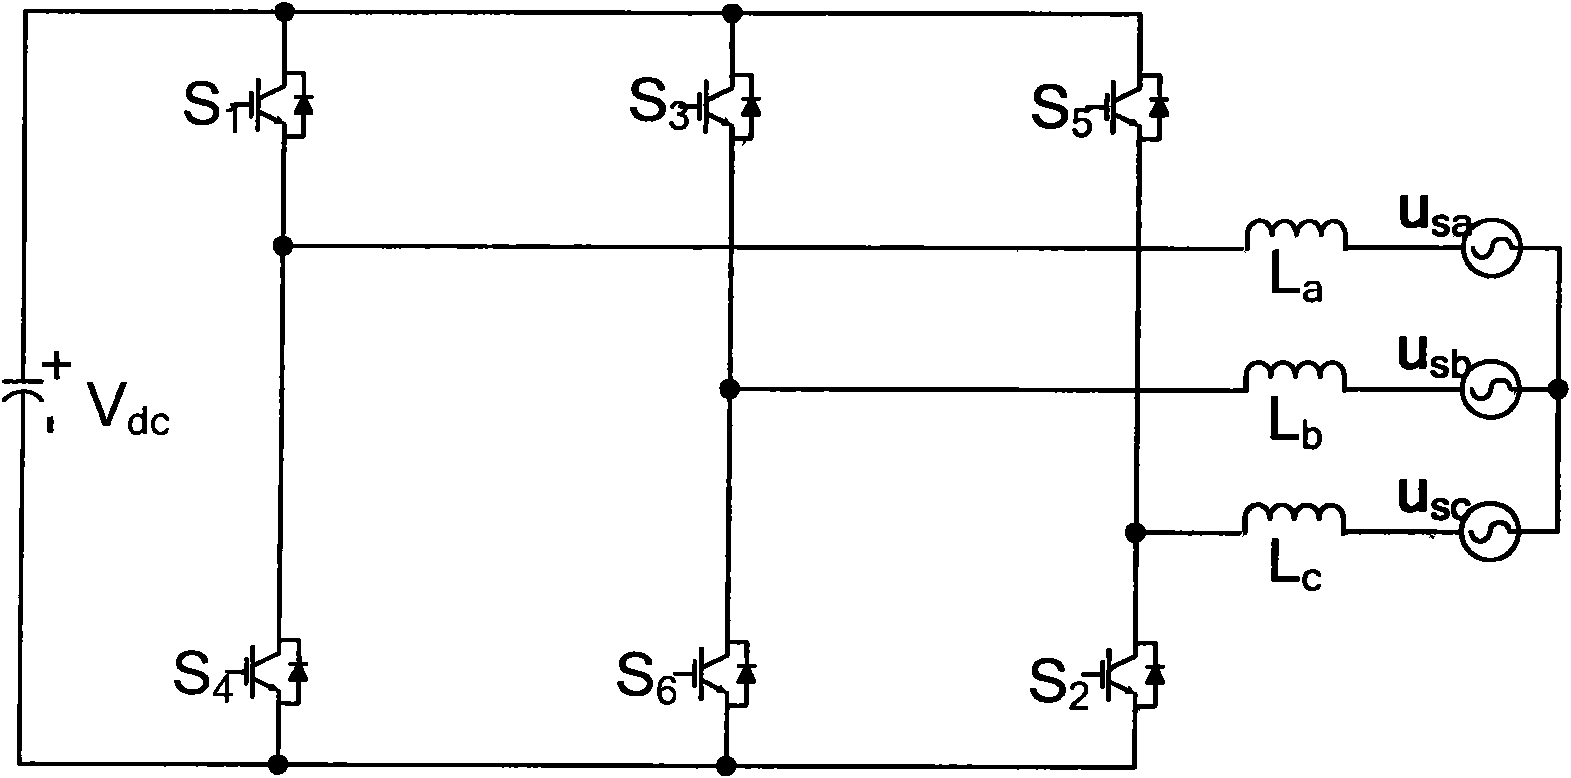 Soft switching three-phase gird-connected inverter additionally provided with freewheeling path